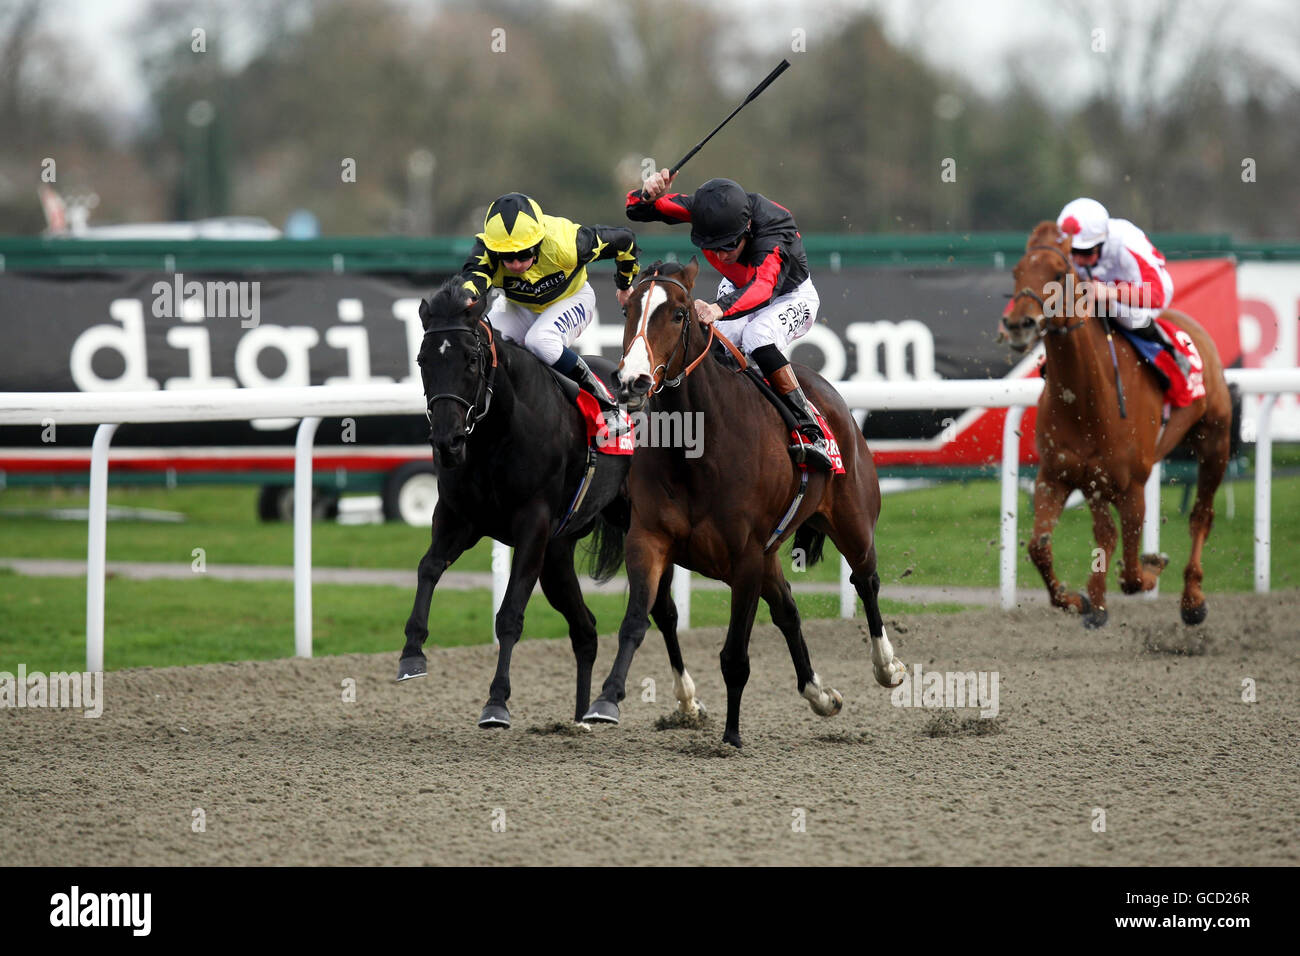 Shamwari Lodge ridden by Richard Hughes (black cap) wins the 32REd Casino Snowdrop Fillies' stakes during the Easter Saturday Race Day at Kempton Park Racecourse, Kempton. Stock Photo